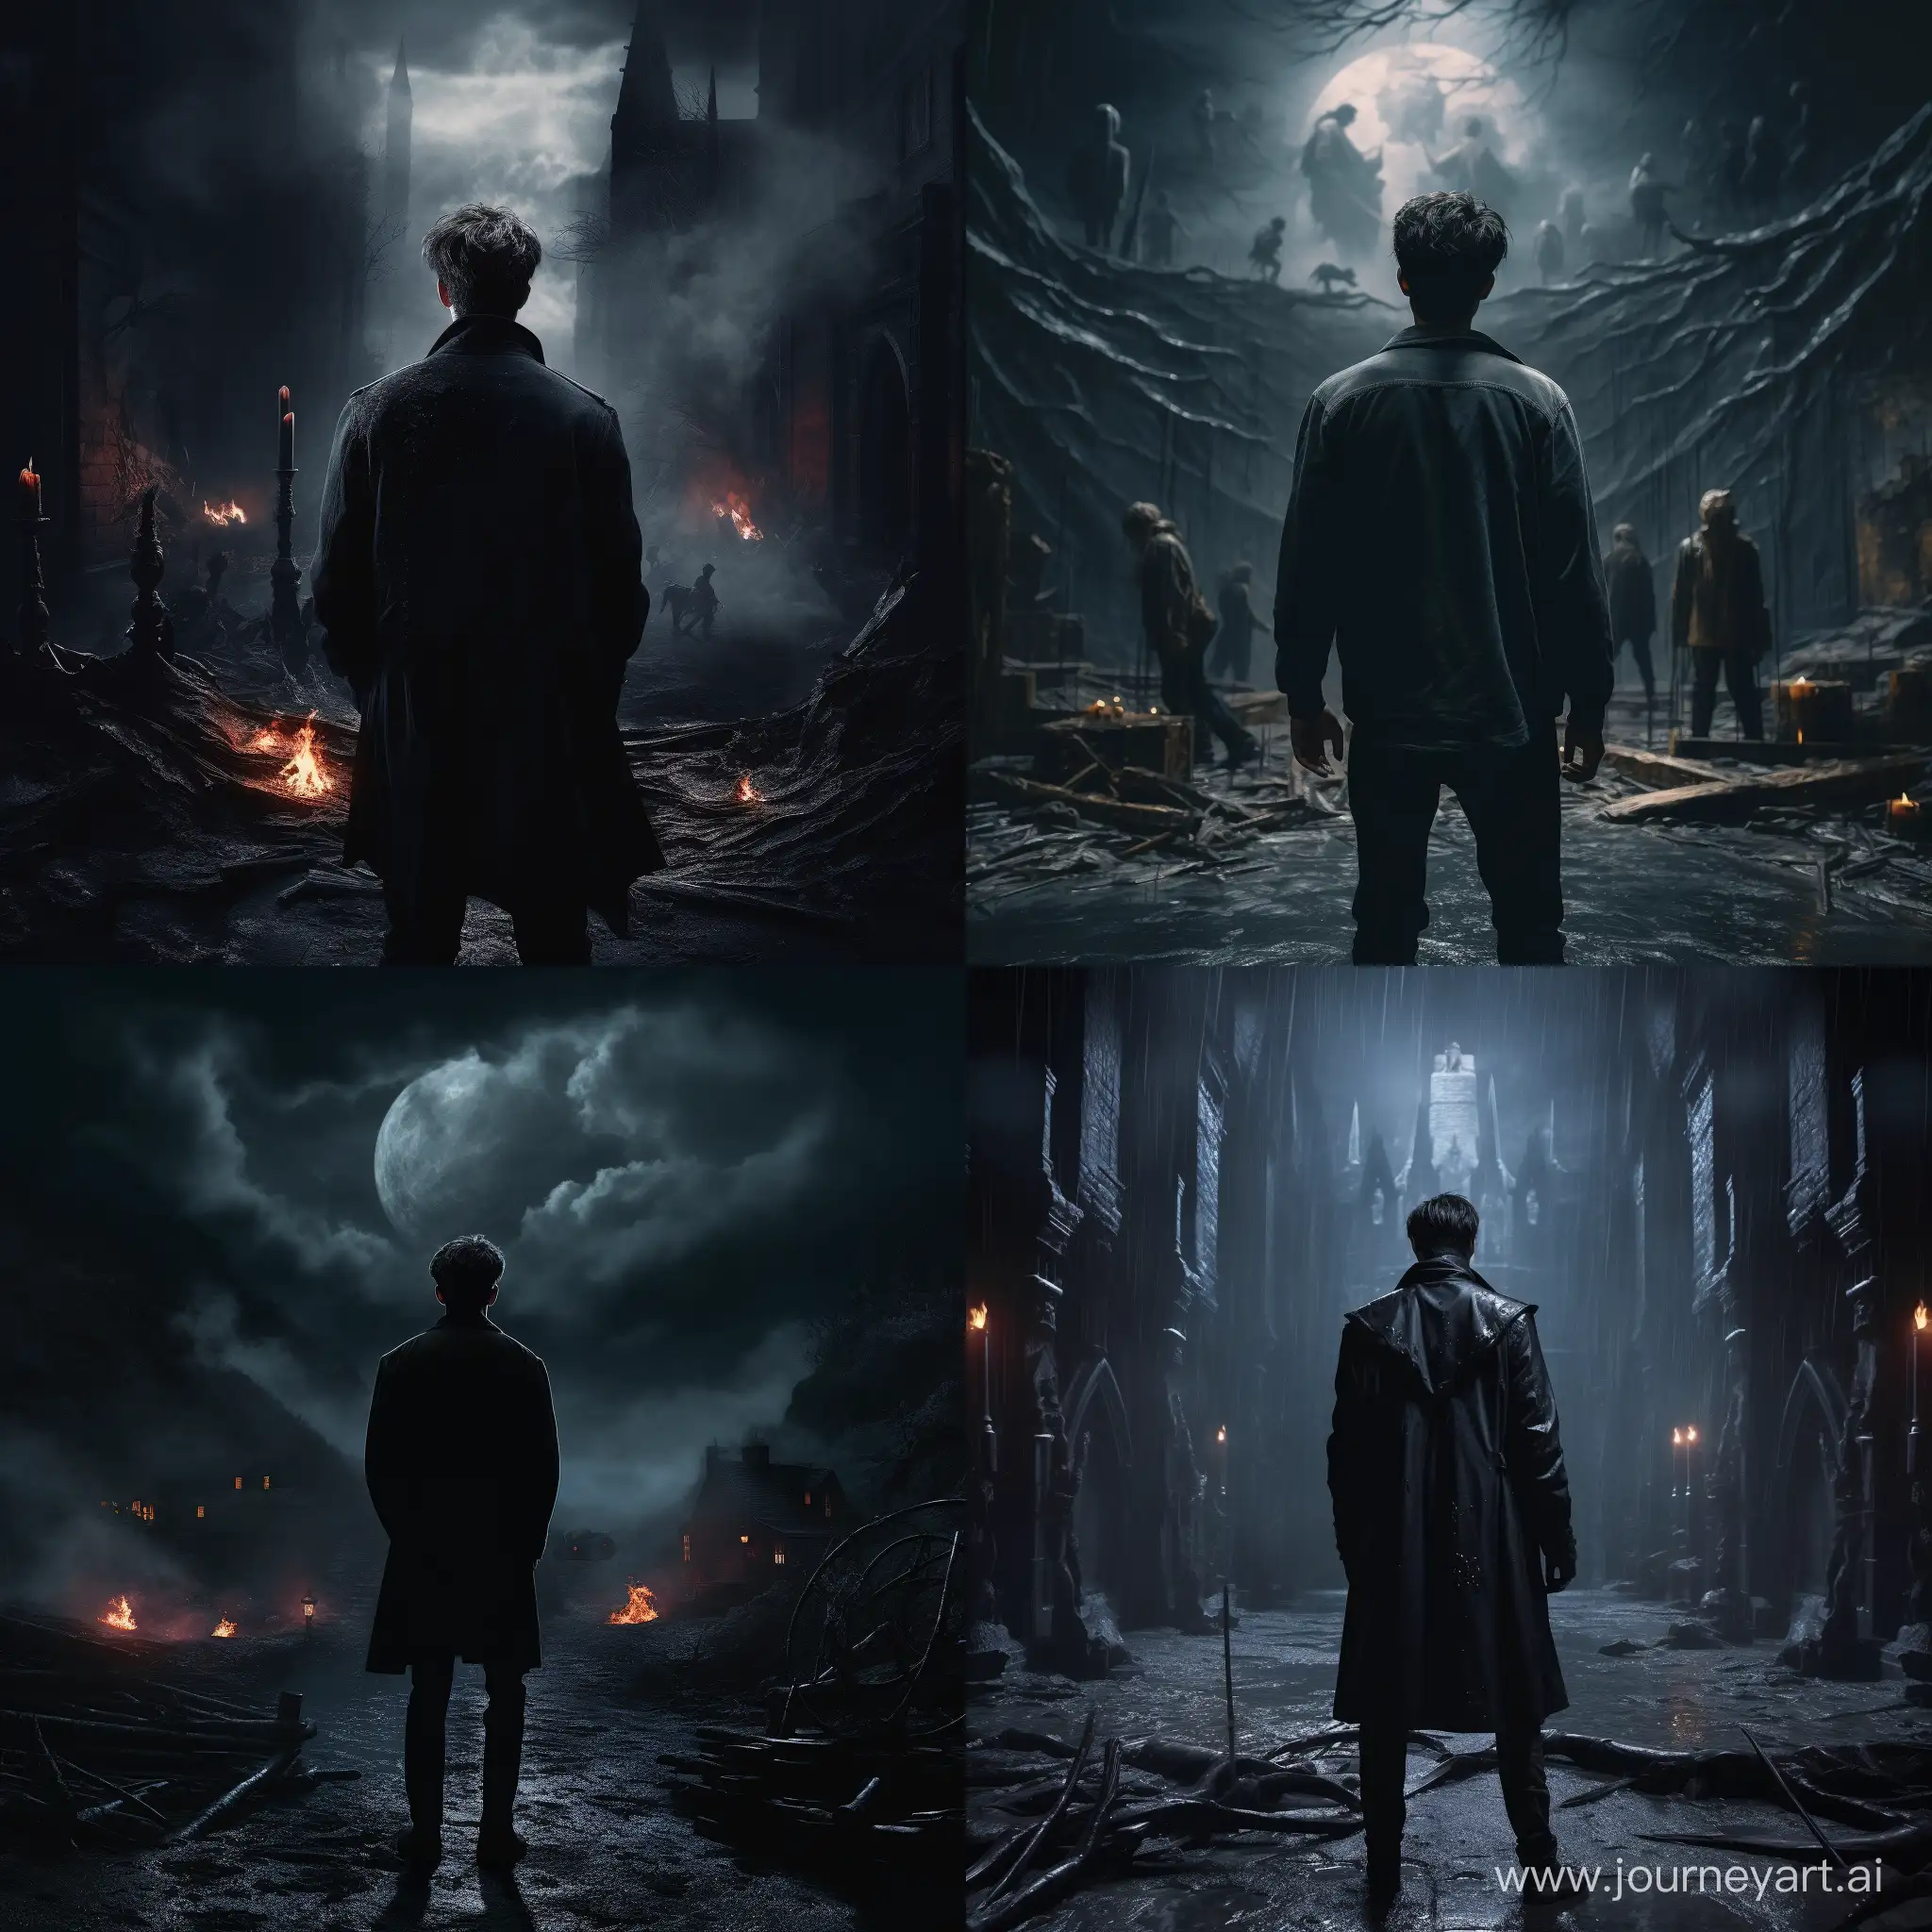 Mysterious-Harry-PotterInspired-Scene-with-Standing-Man